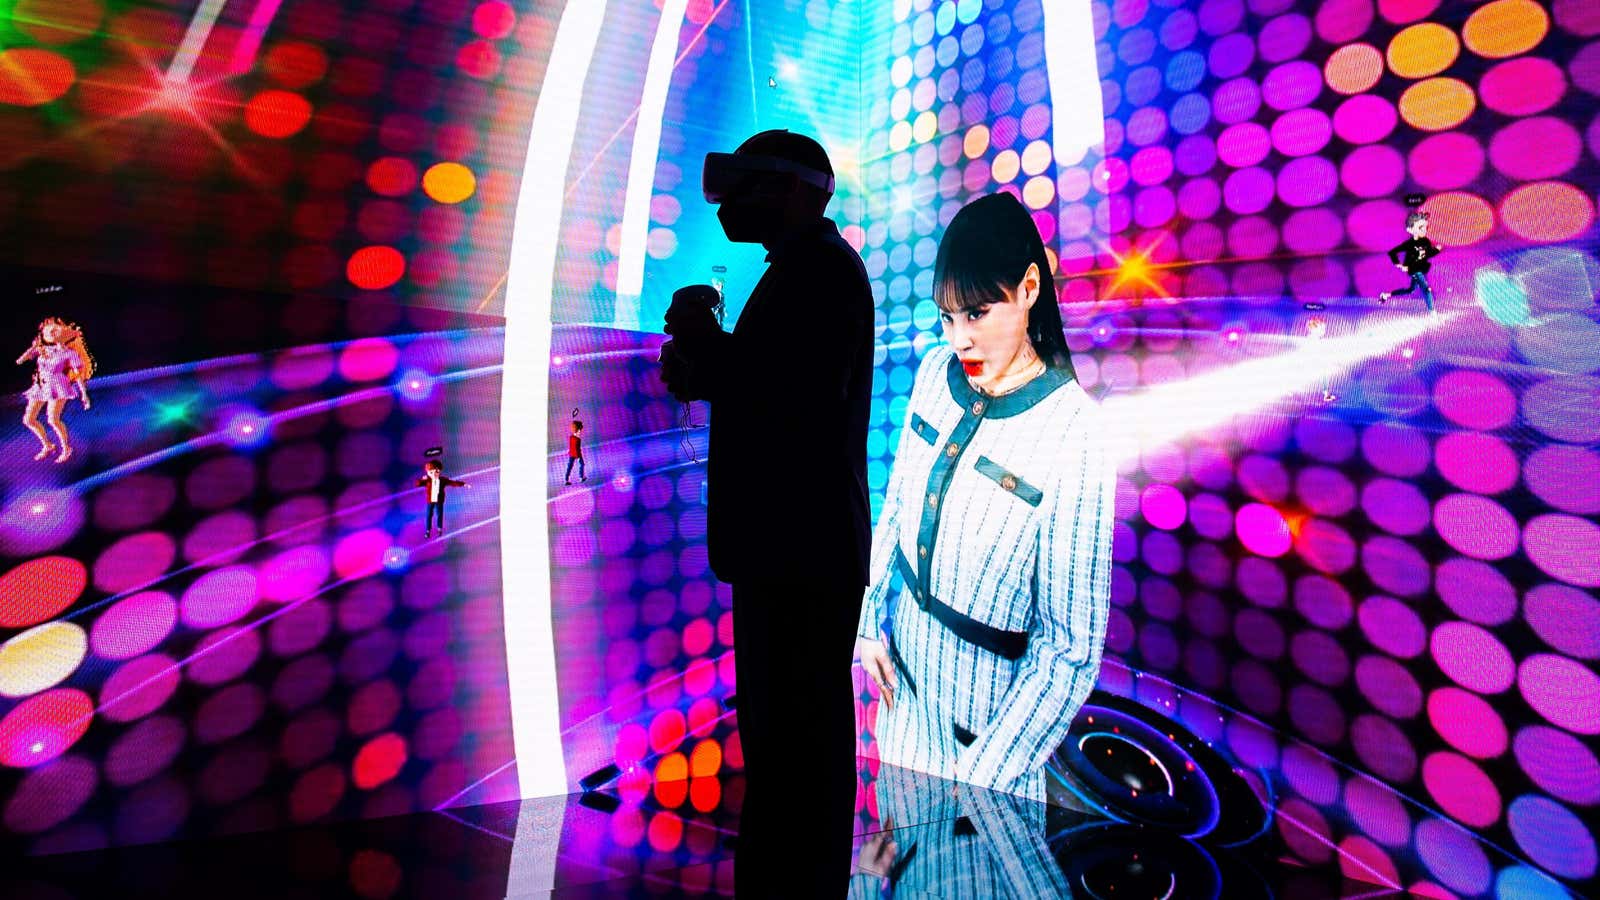 A user in a Meta Quest 2 headset uses an immersive experience at the Mobile World Congress event in Barcelona, Spain in Feb. 2022. 